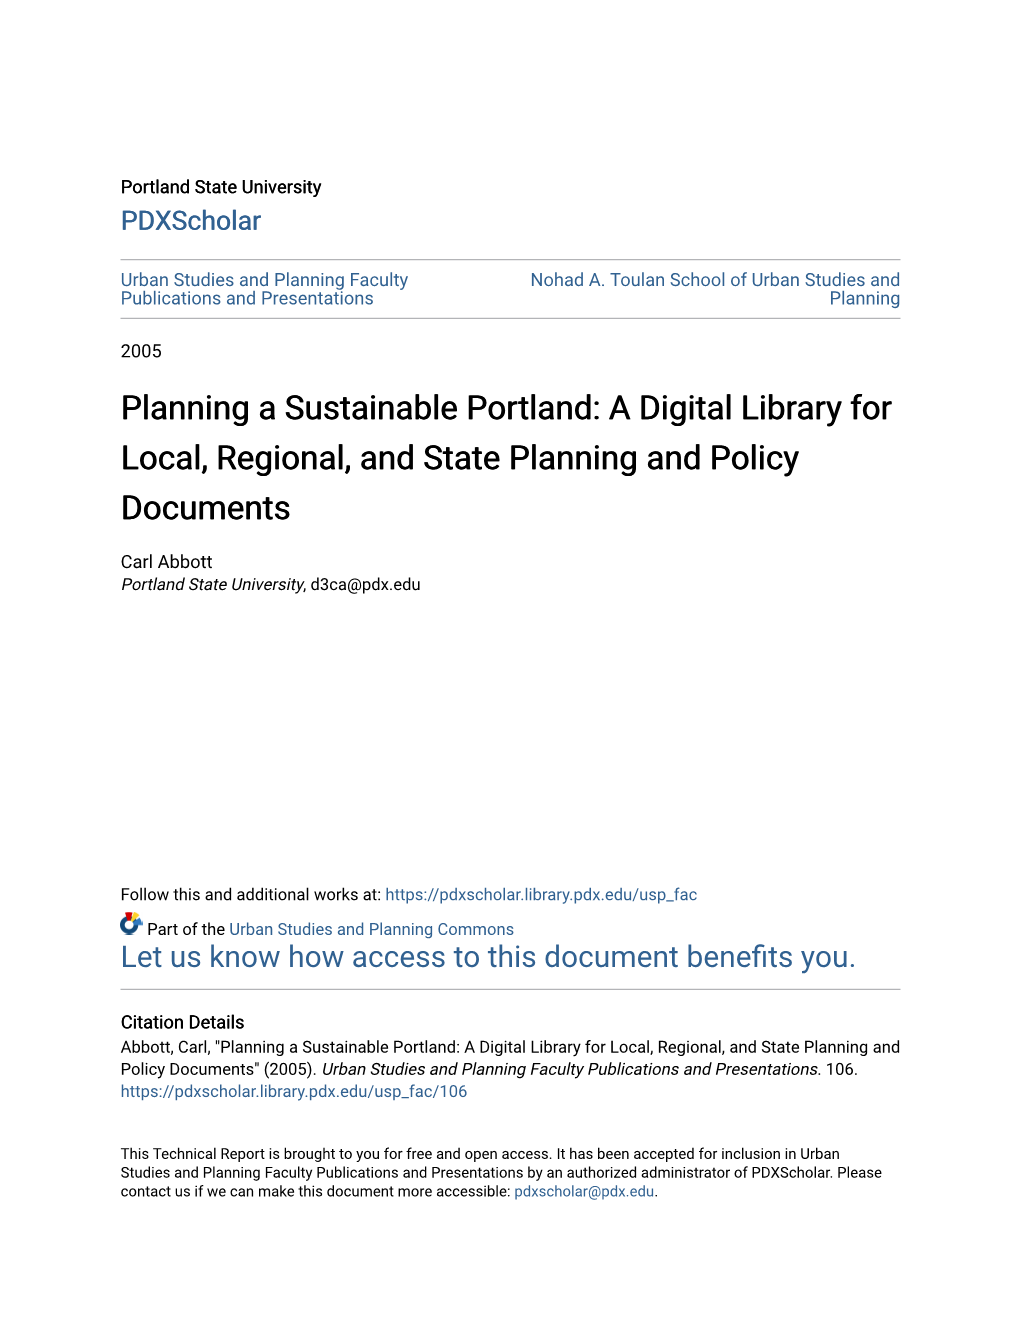 Planning a Sustainable Portland: a Digital Library for Local, Regional, and State Planning and Policy Documents